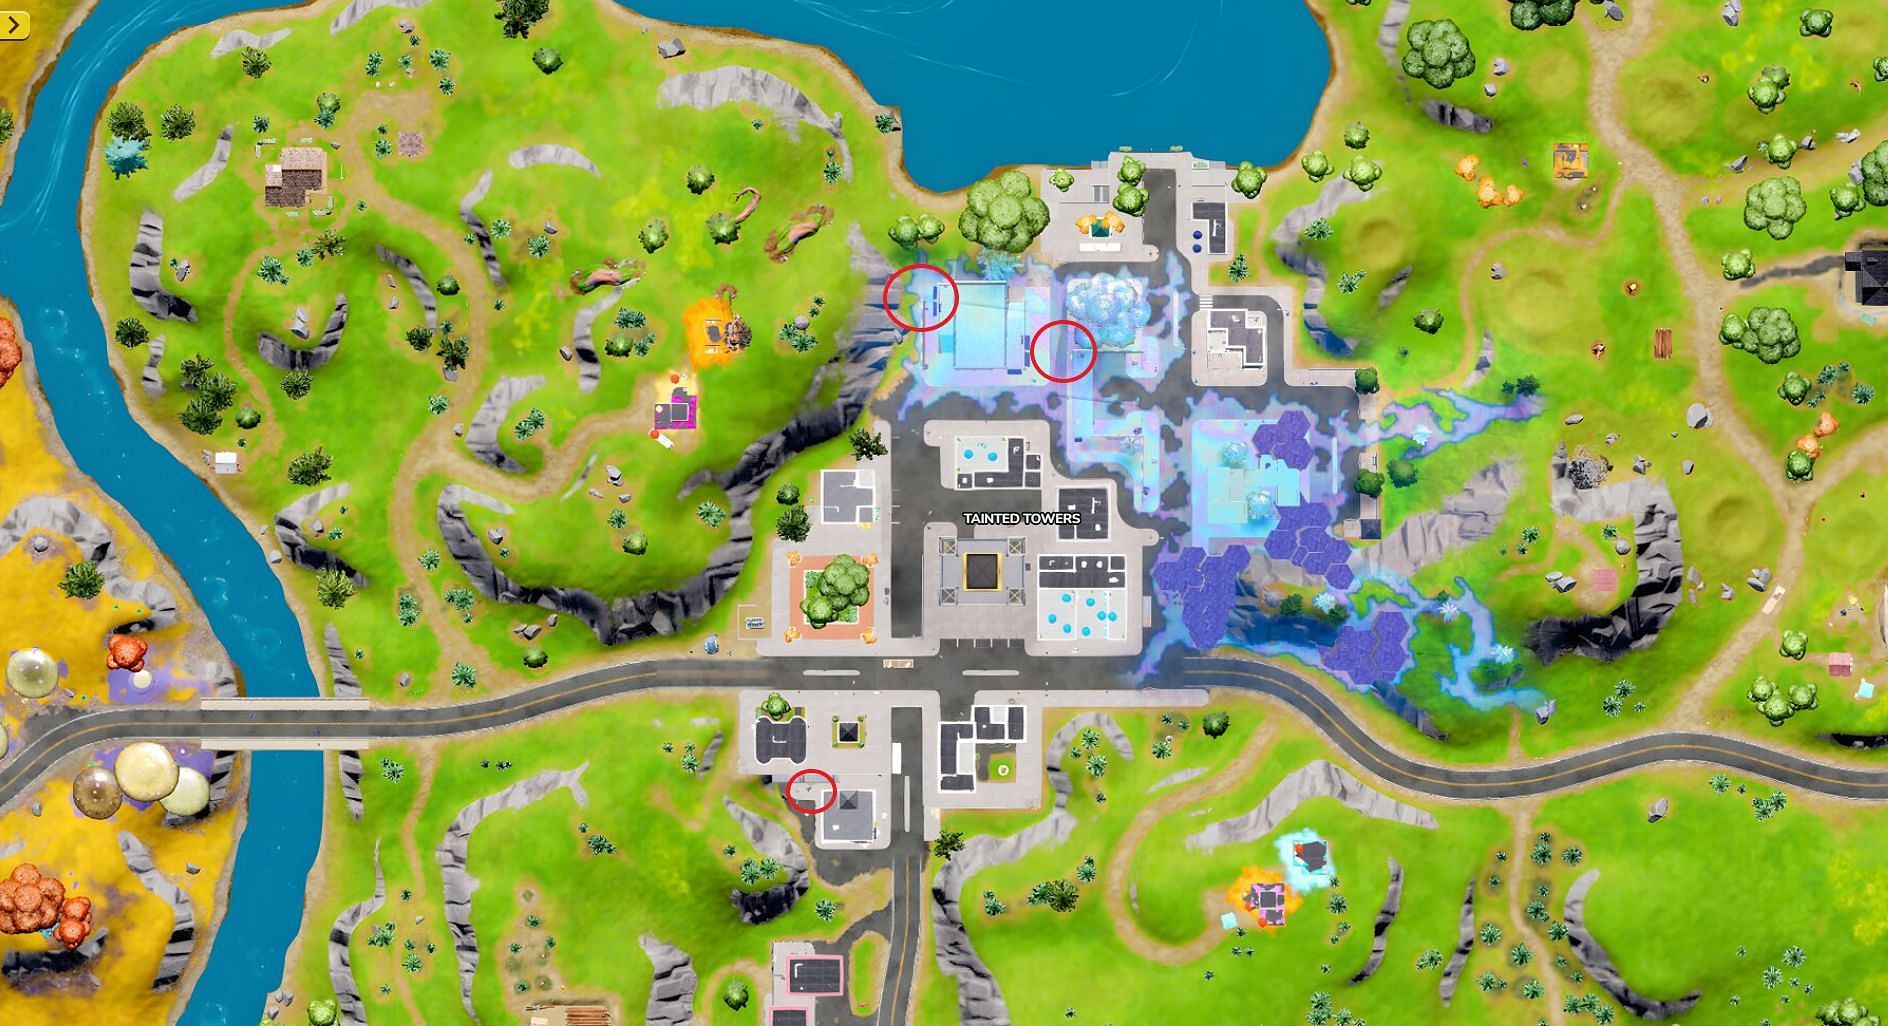 Open dumpster locations in Tainted Towers (Image via Fortnite.GG)